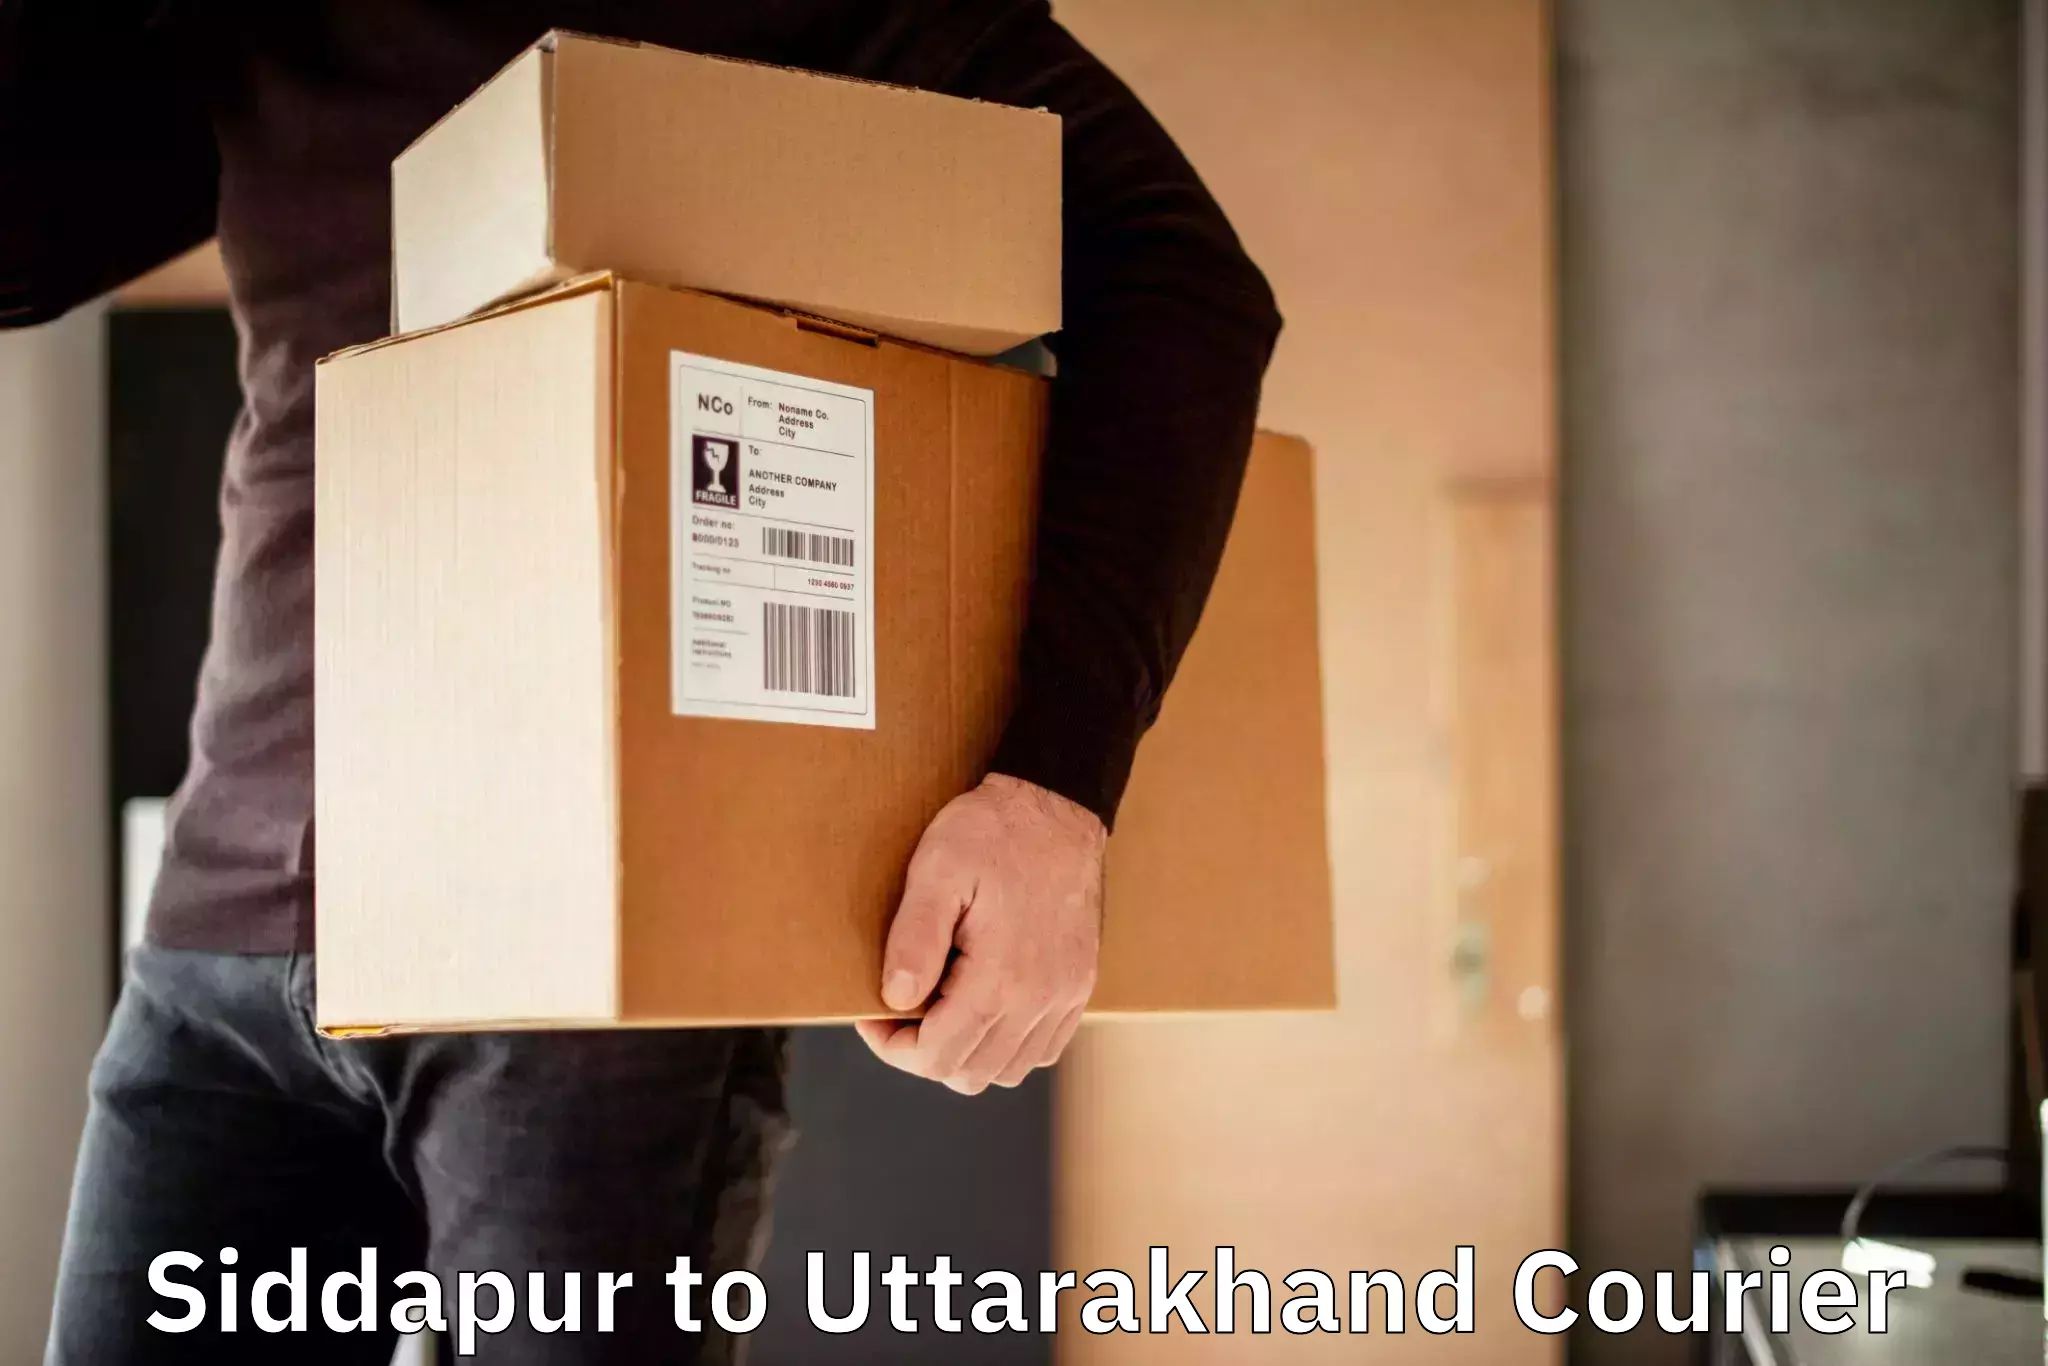 Full-service courier options in Siddapur to Dehradun